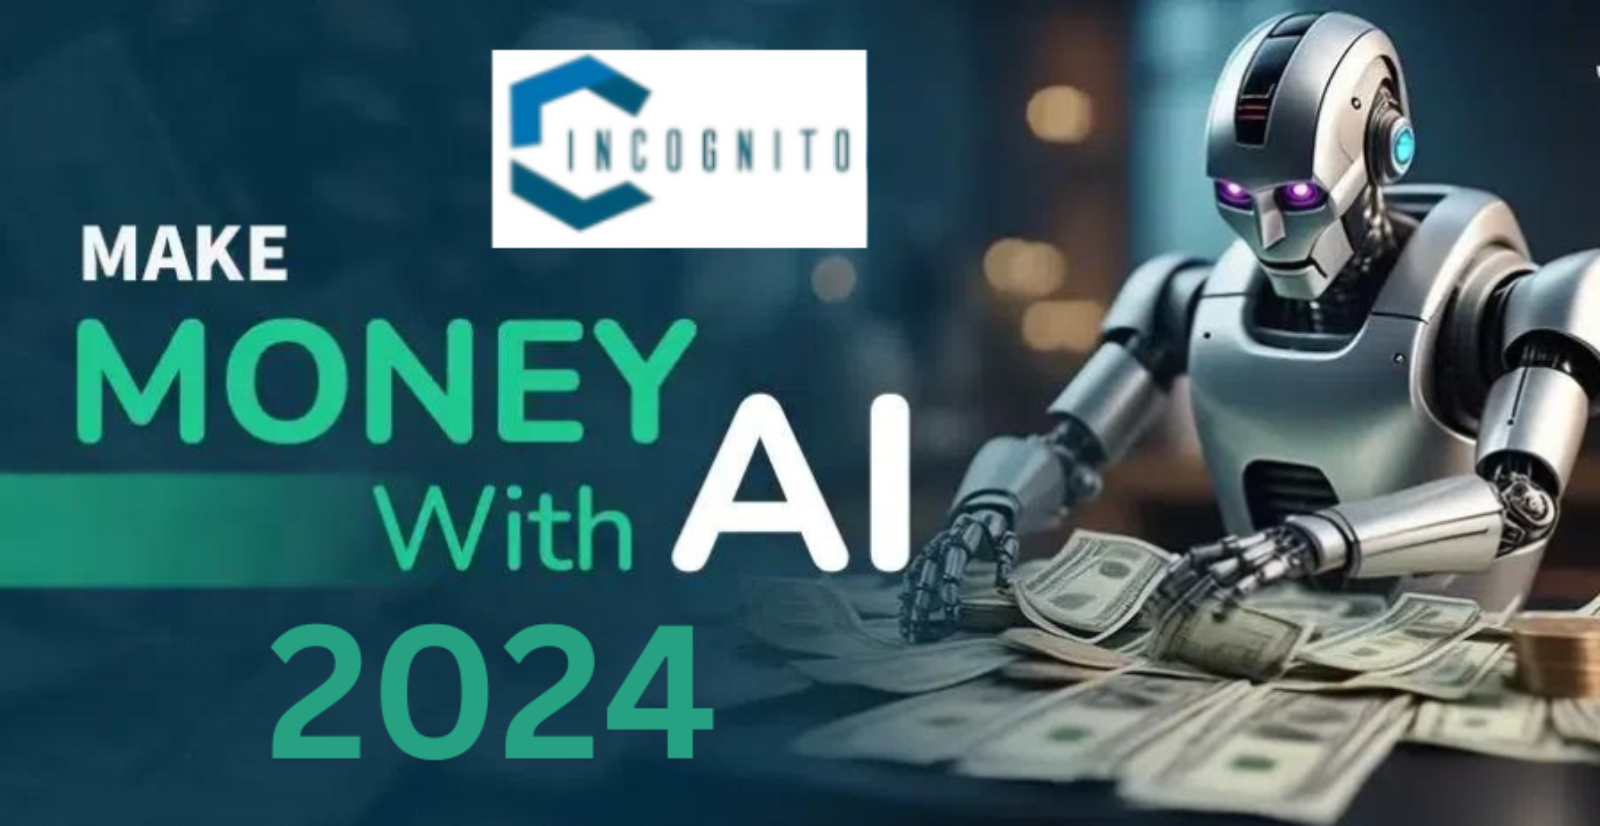 How To Make Money With AI In 2024?